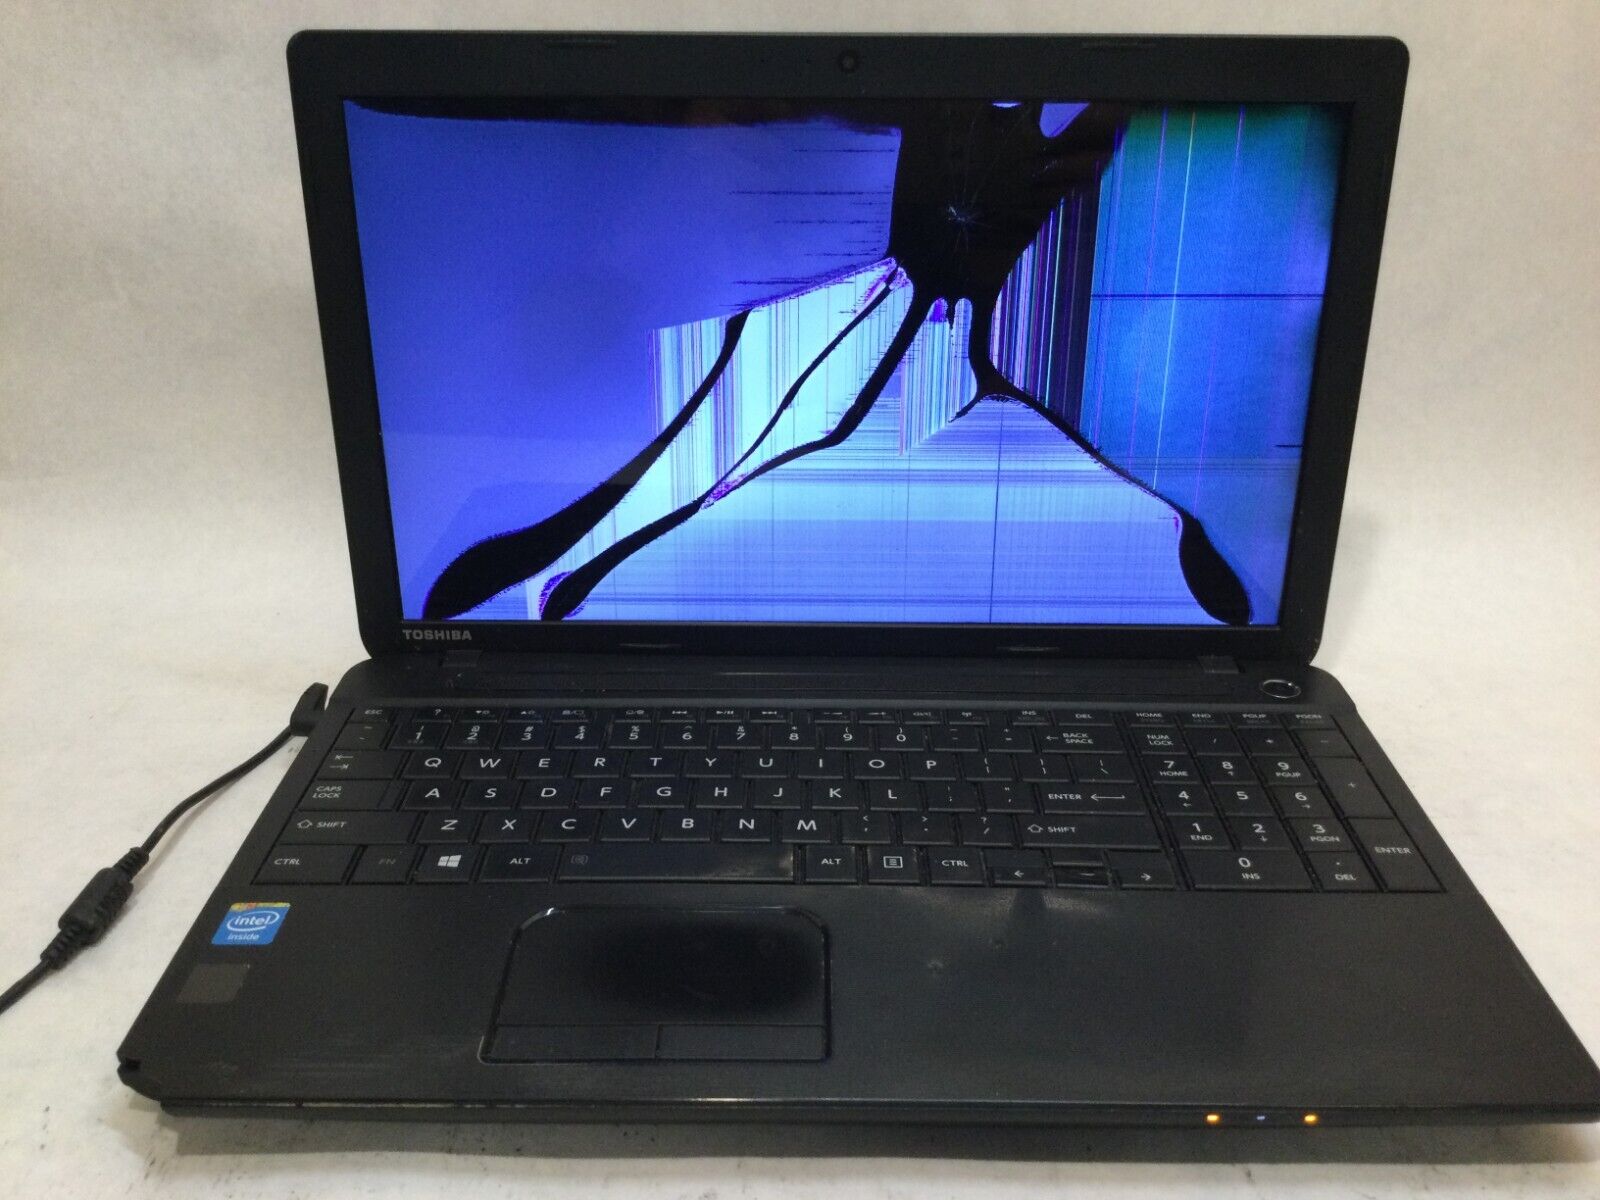 Toshiba Satellite C55-A5249 15.6” / UNKNOWN SPECIFICATIONS / (CRACKED) MR